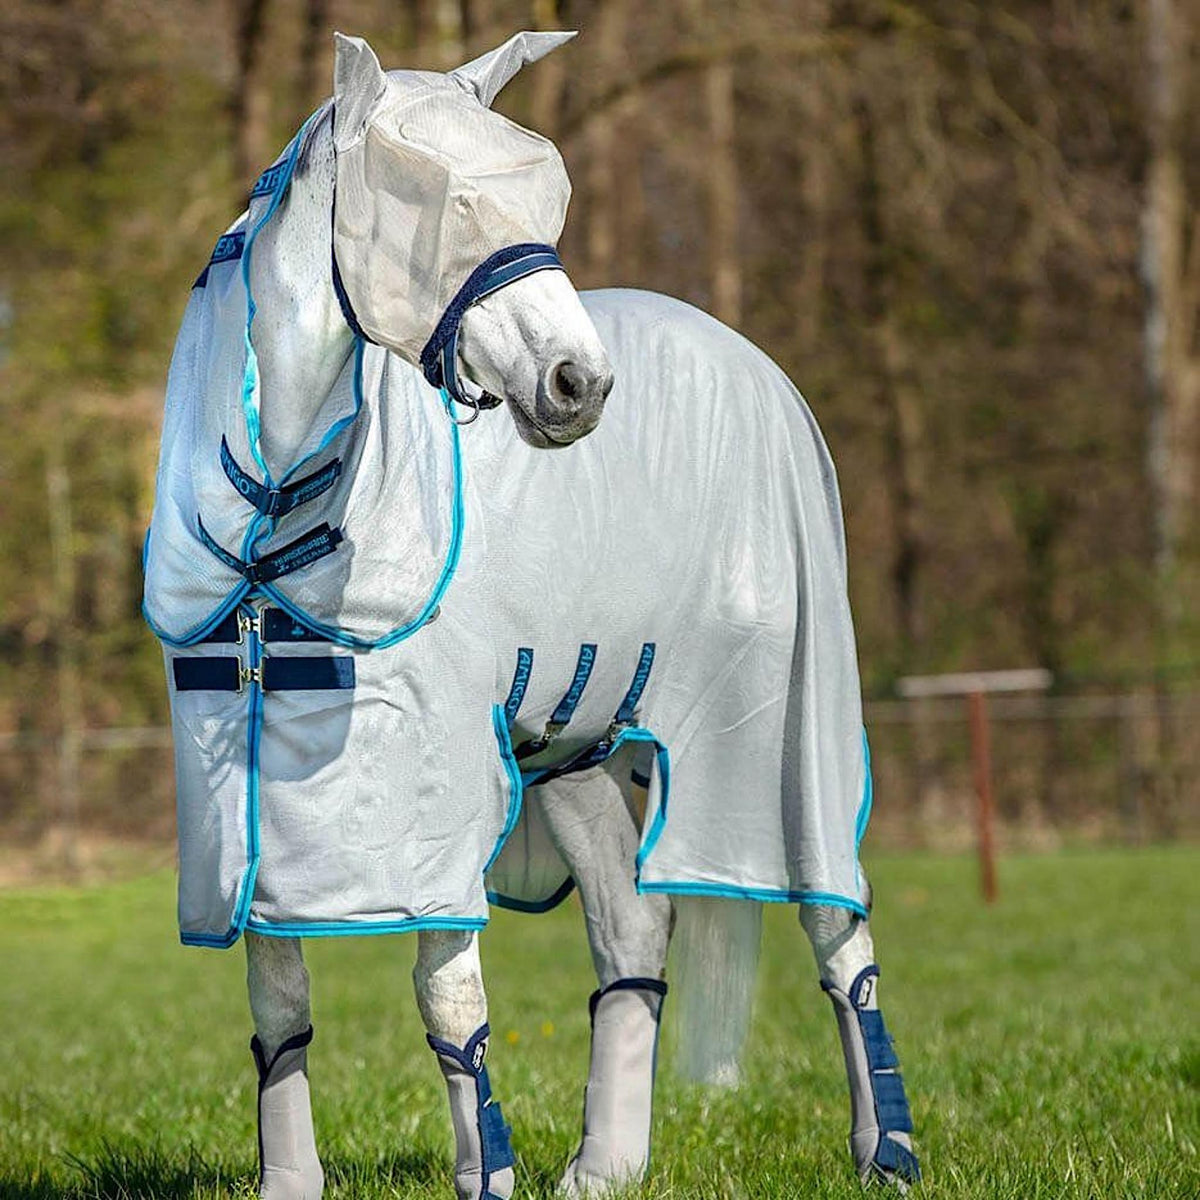 Summer mesh horse rug, silver with blue trim.